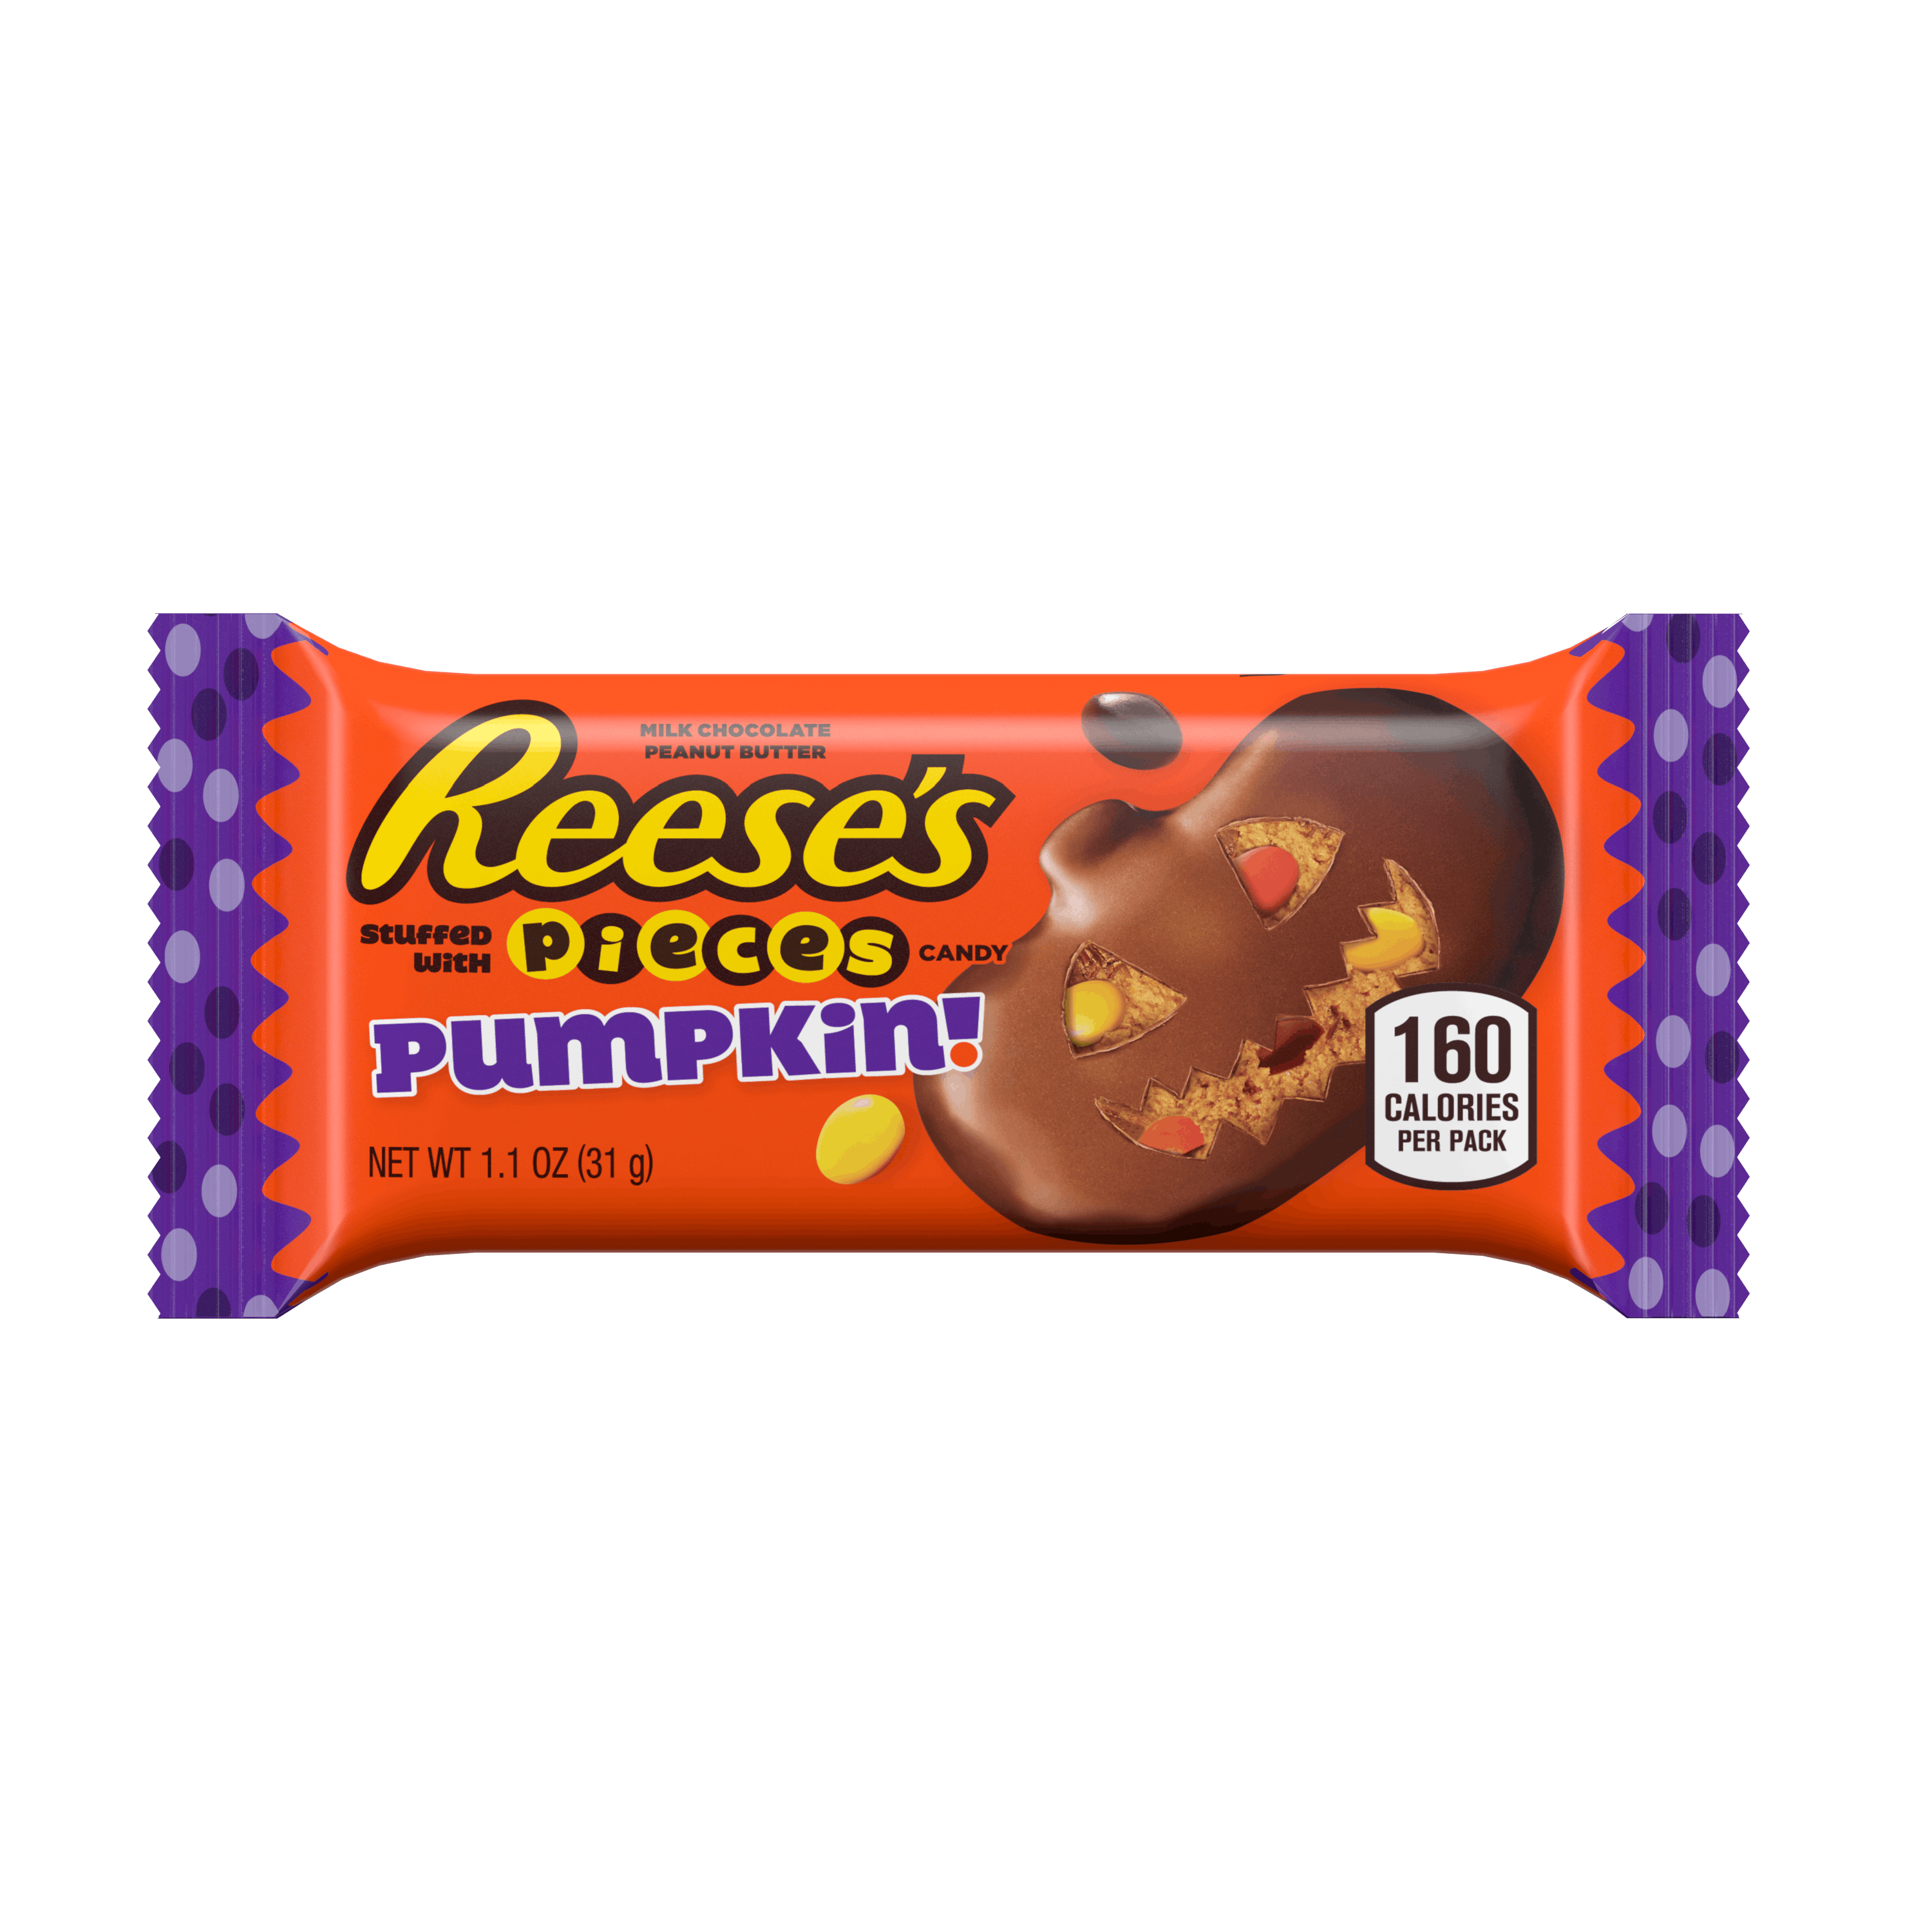 The New Reese S Halloween Candy Is Stuffed With Reese S Pieces And